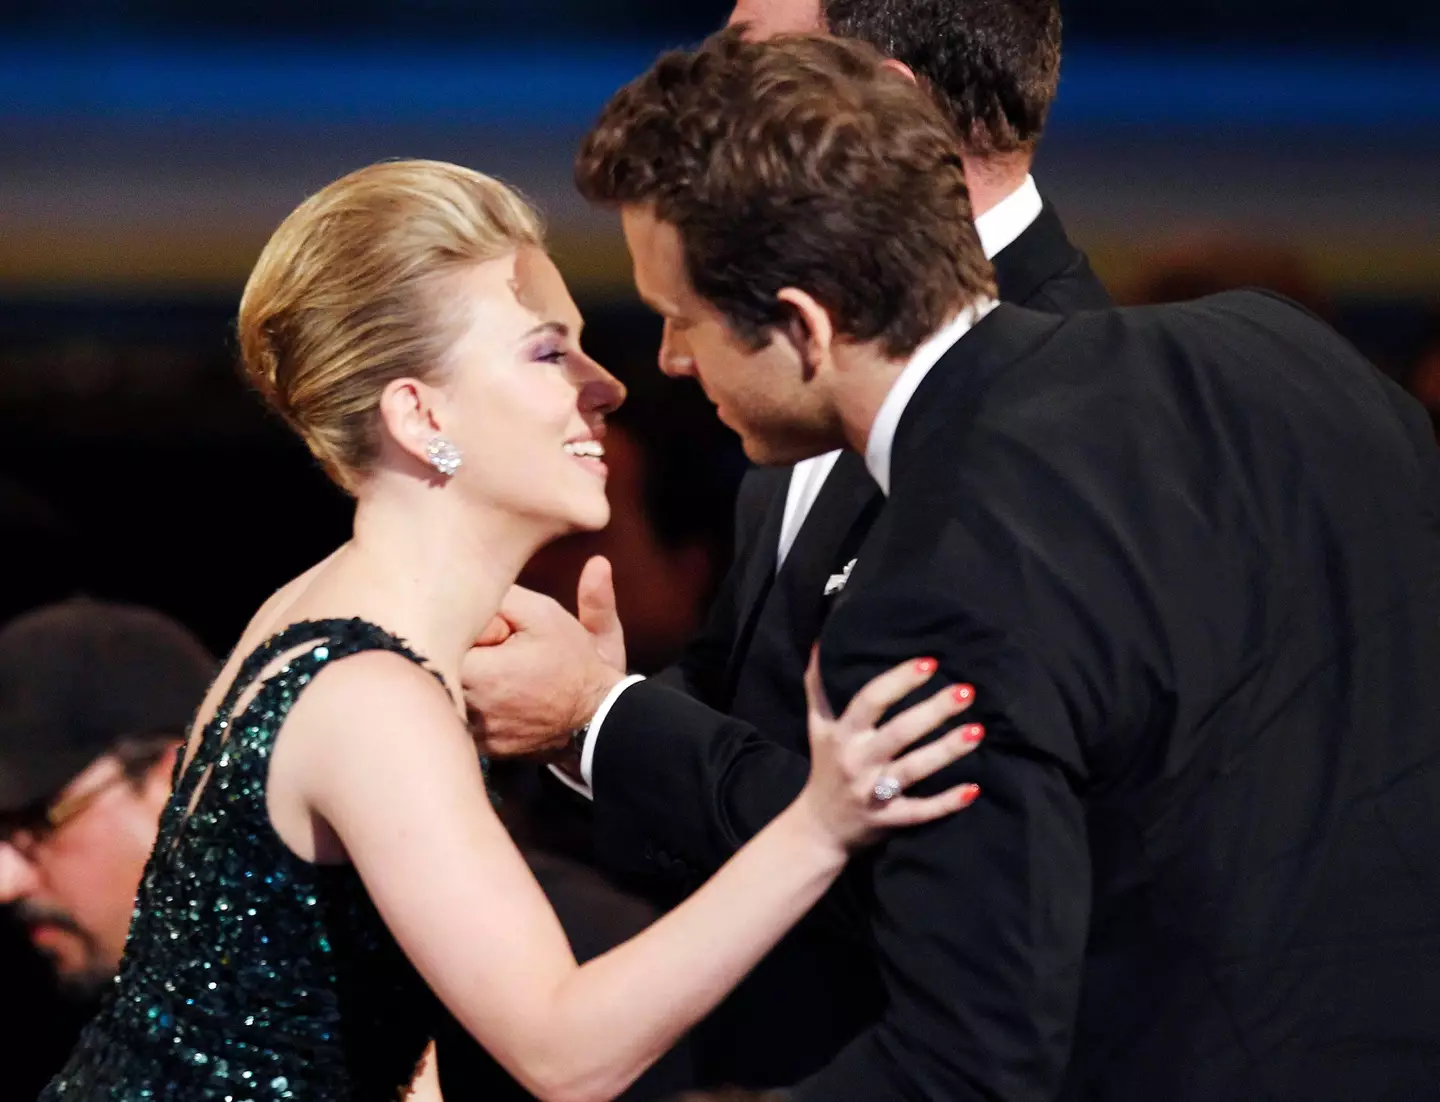 Scarlett Johansson and Ryan Reynolds were once husband and wife.